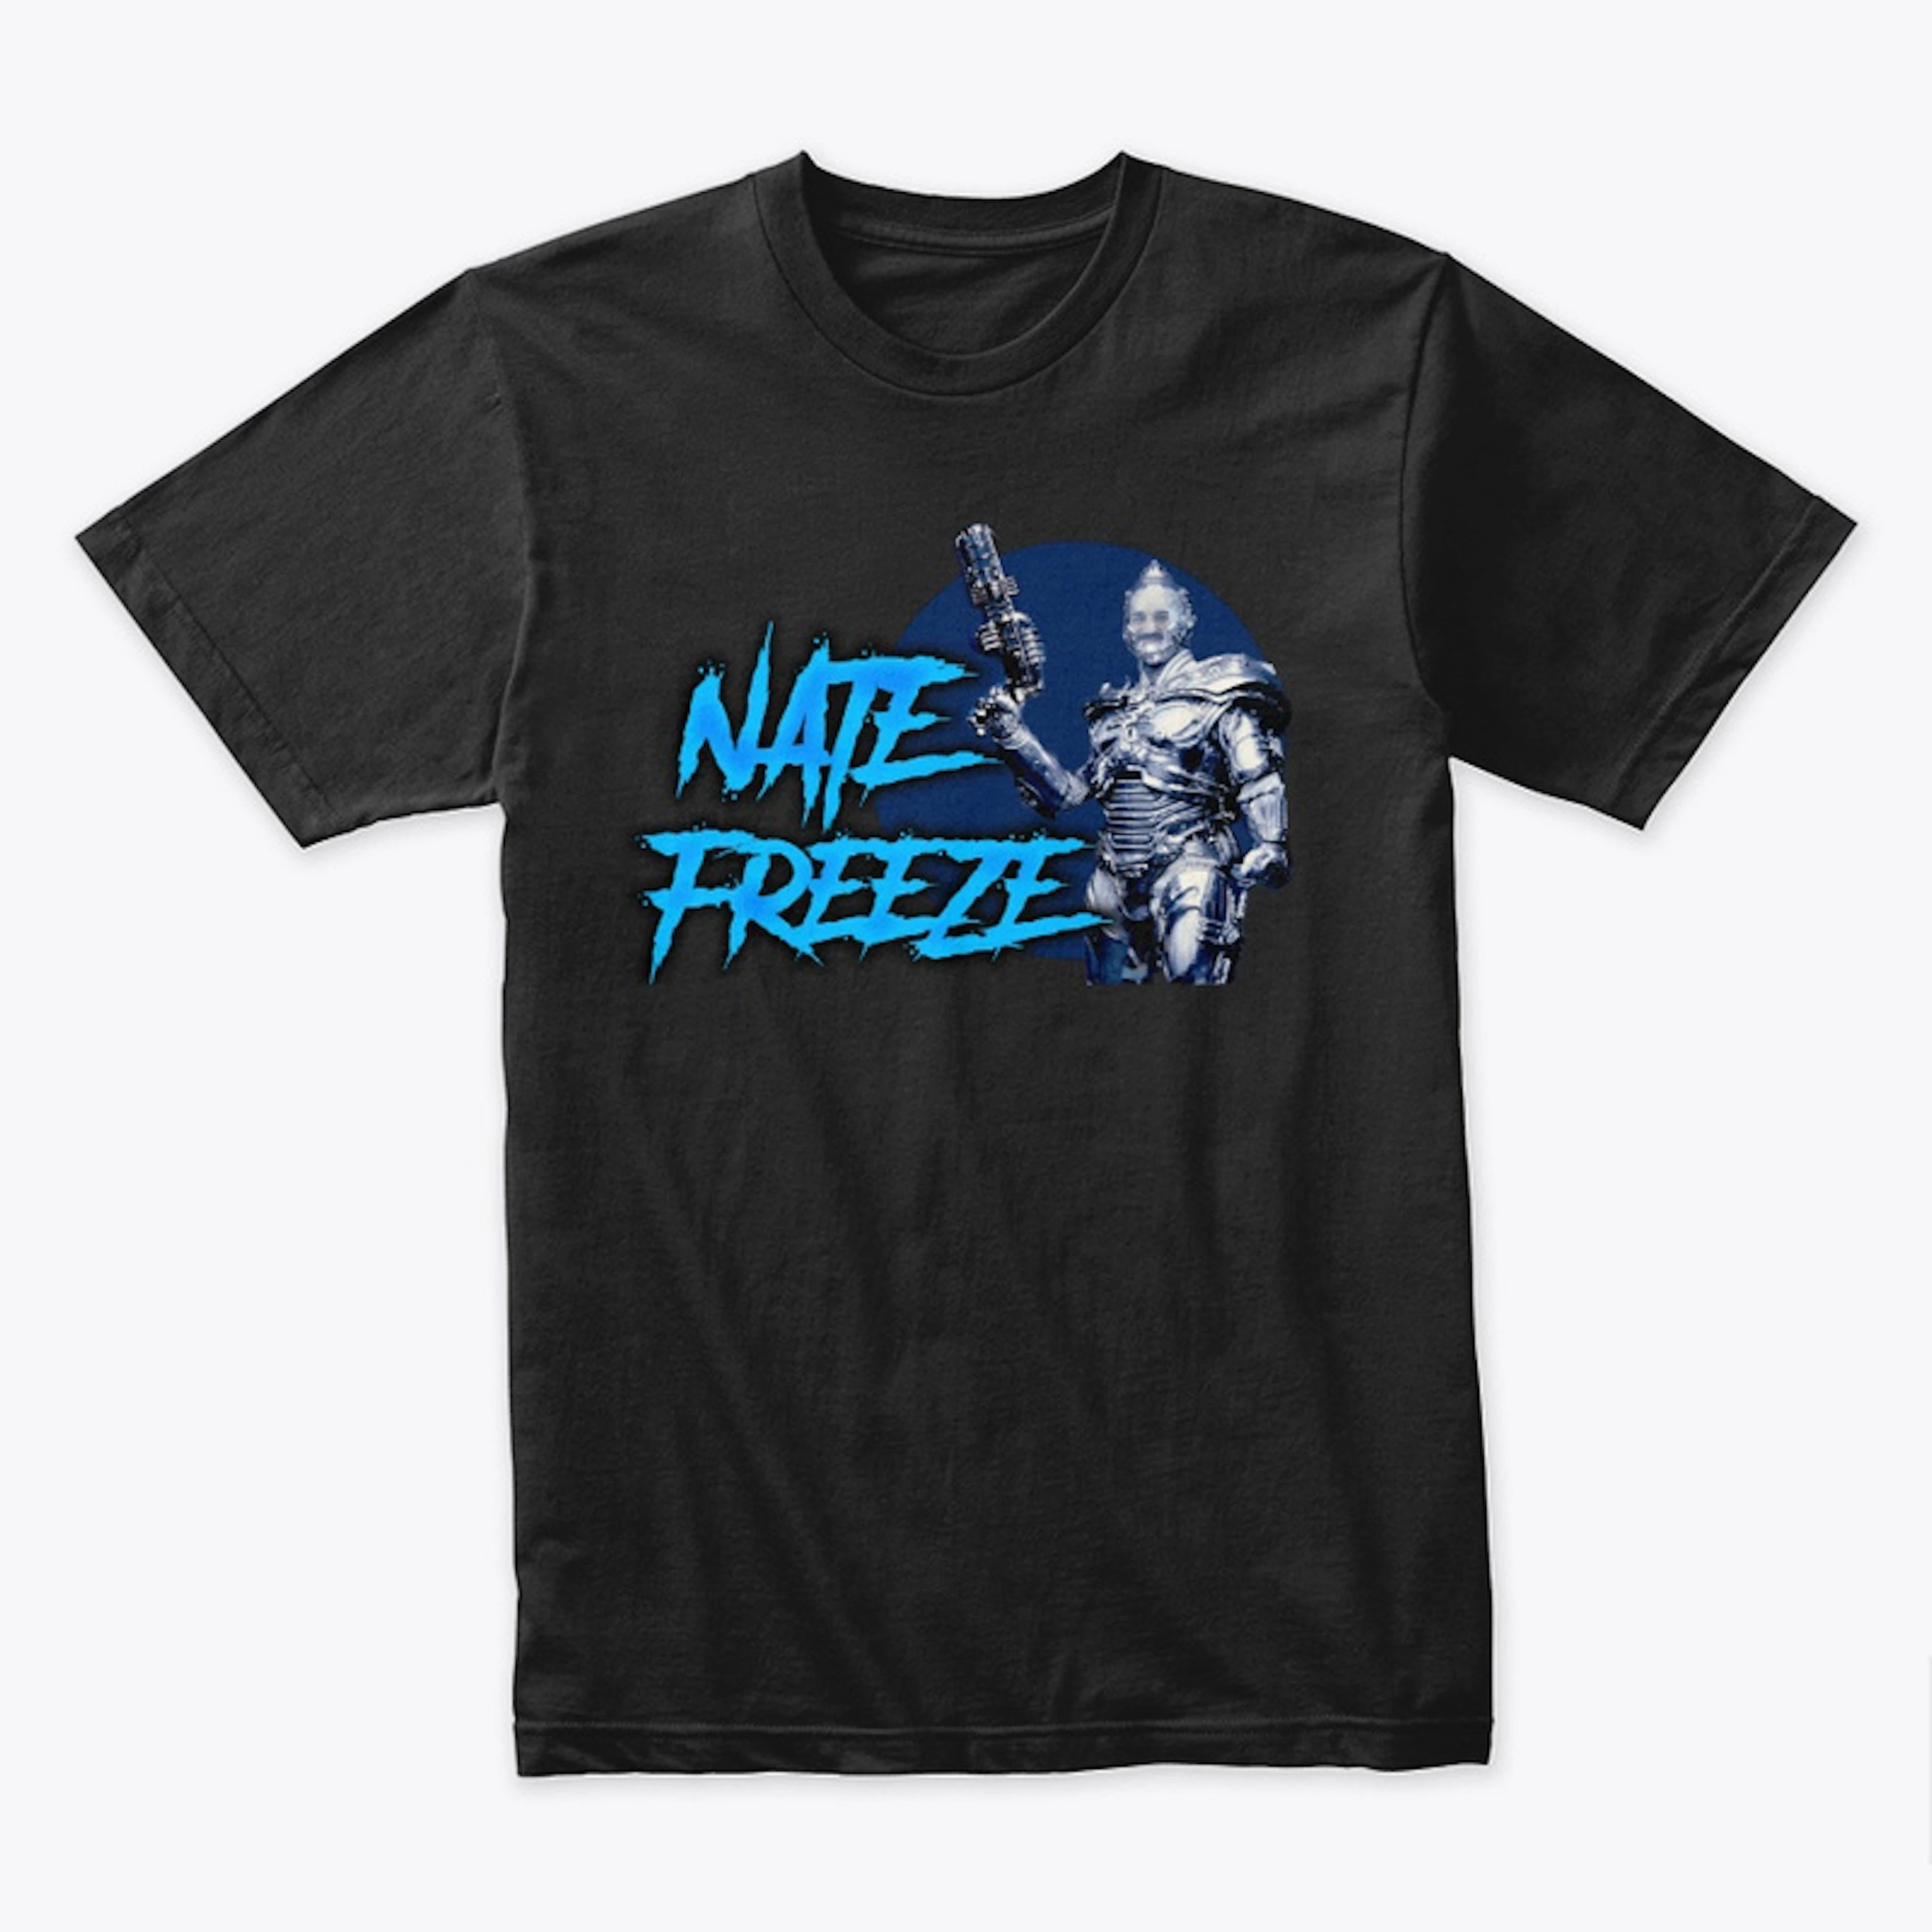 EXCLUSIVE Nate Freeze T-Shirt